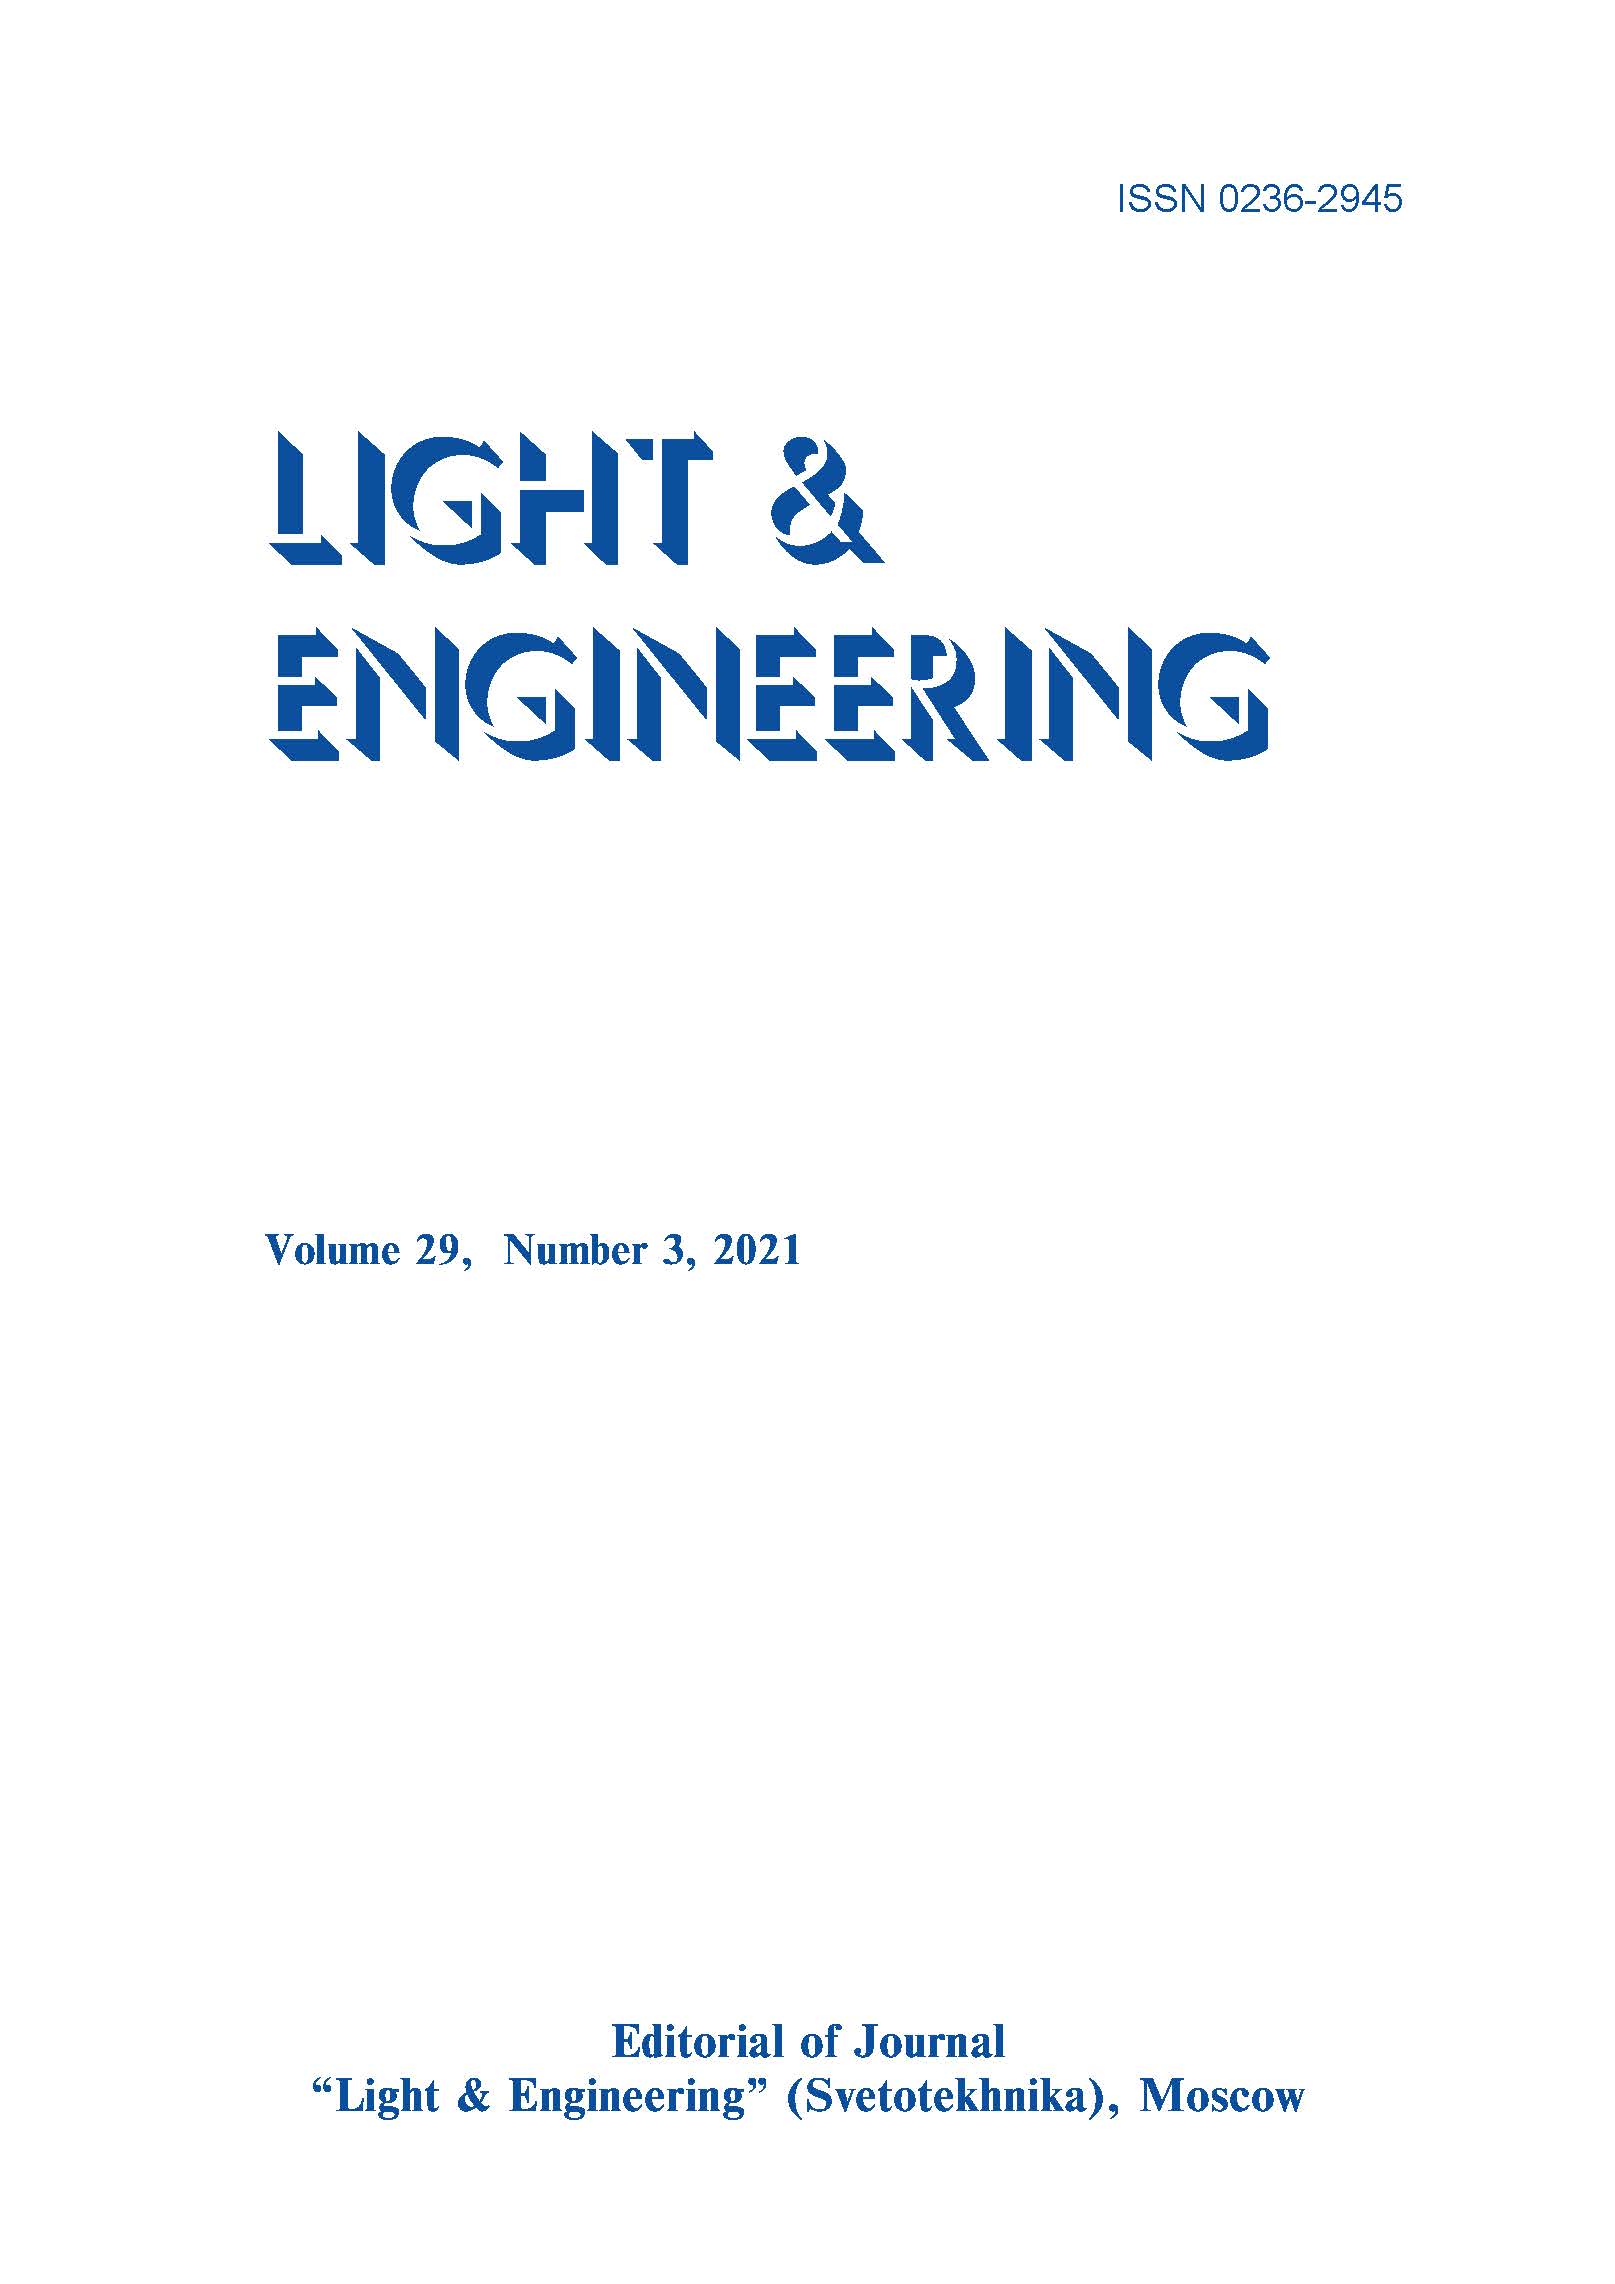 Implementation Of The Flat Beam Technology In Lighting devices Using A Flat Mirror Surface L&E, Vol. 29, No. 3, 2021